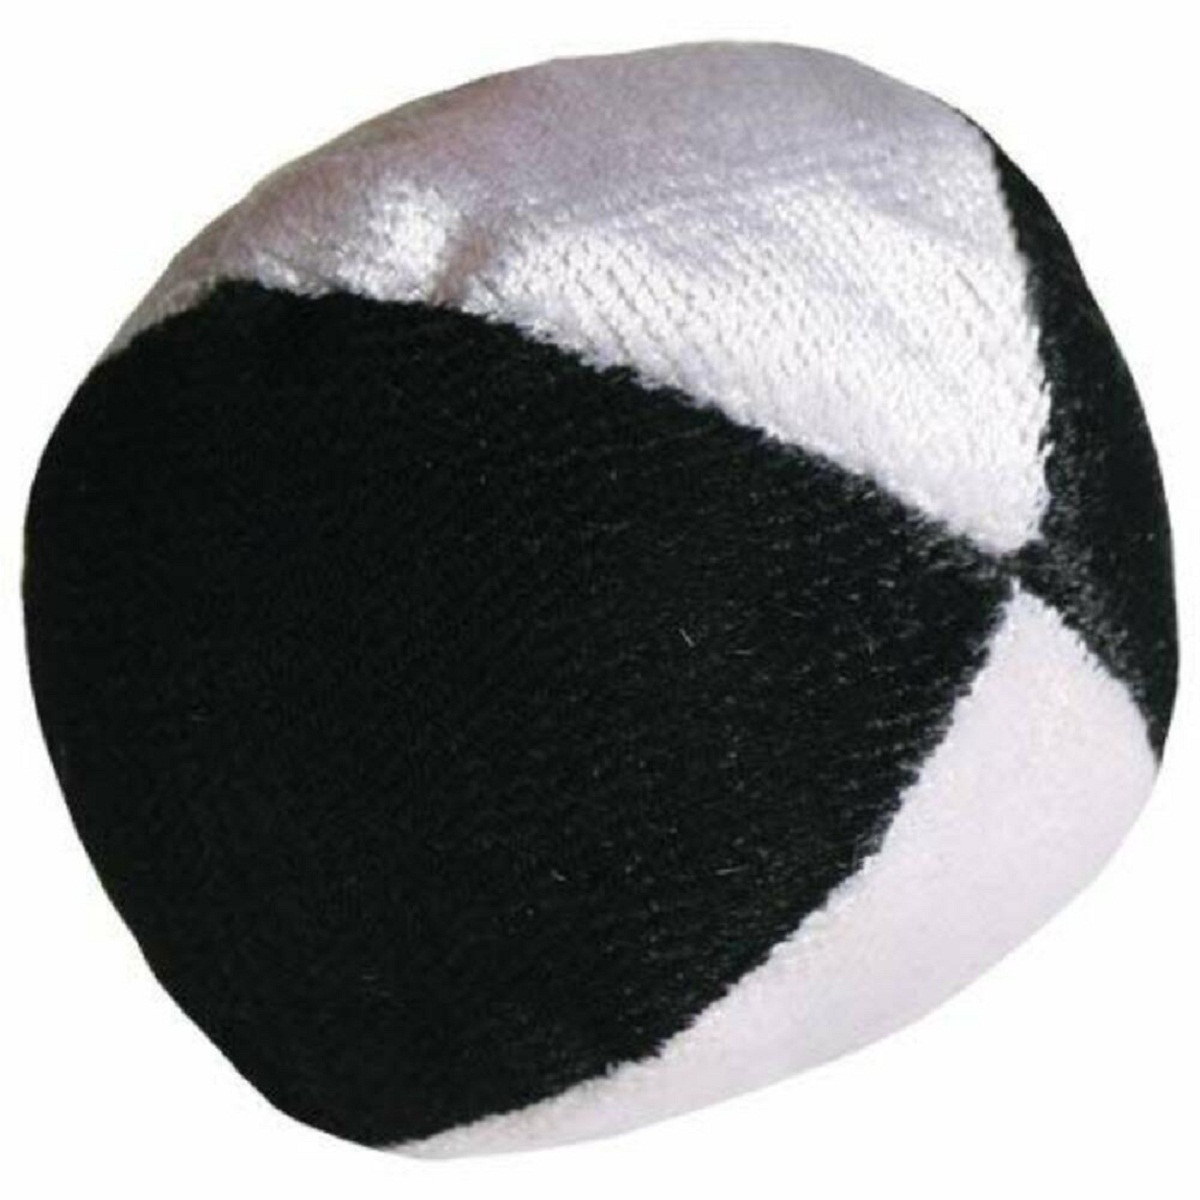 10 Best Dryer Maid Ball For 2023